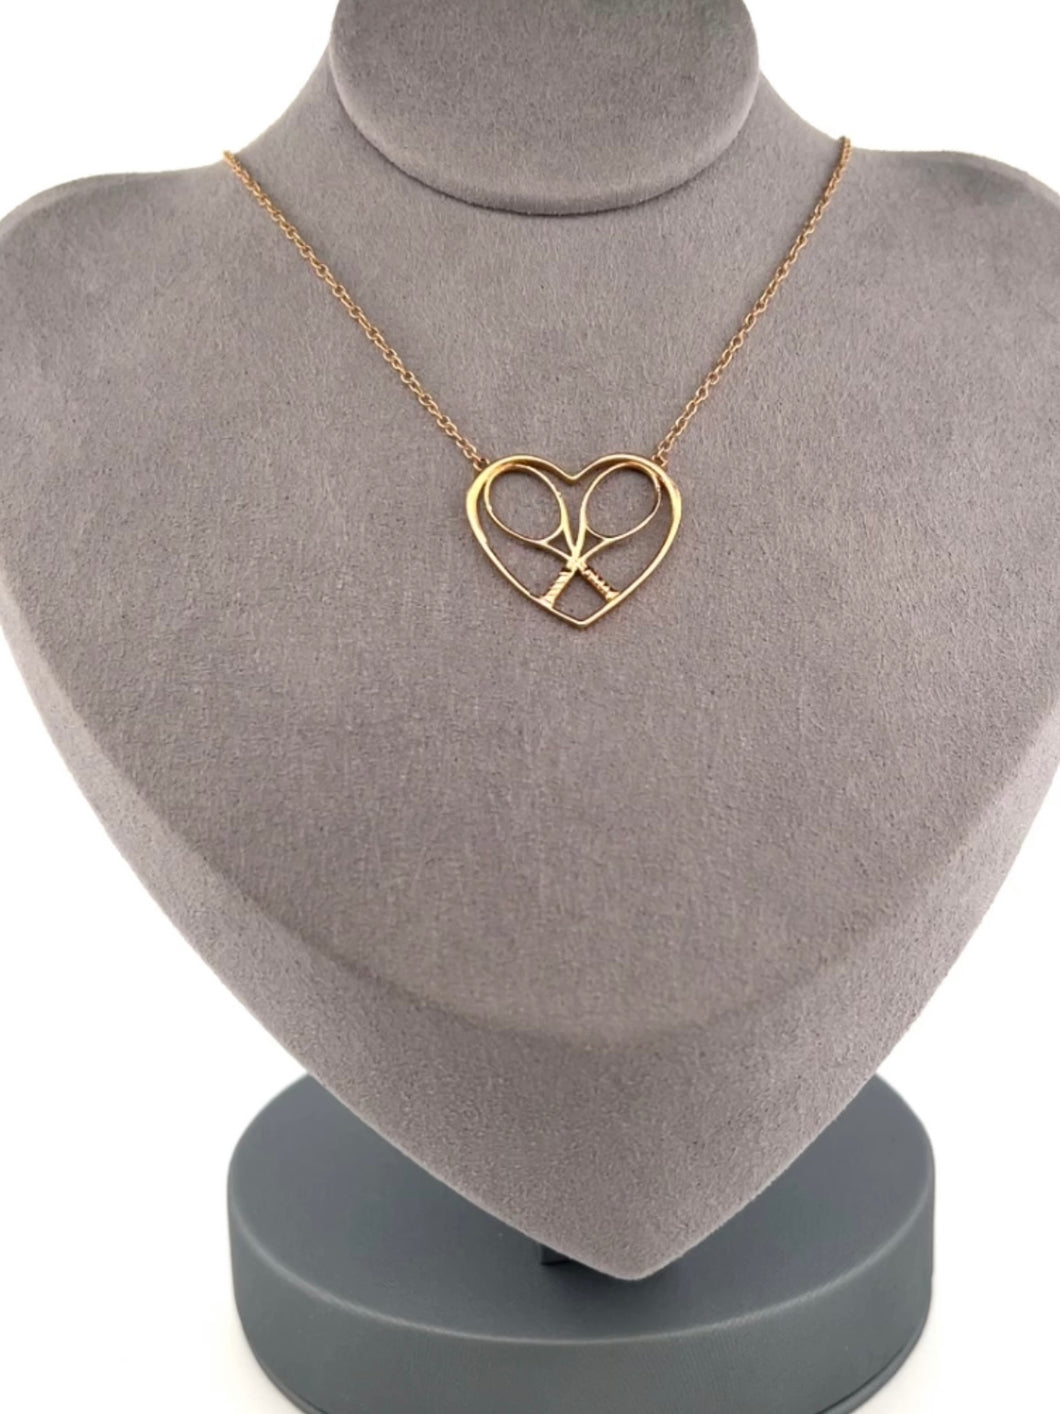 Heart + Rackets Solid Gold Tennis Necklace